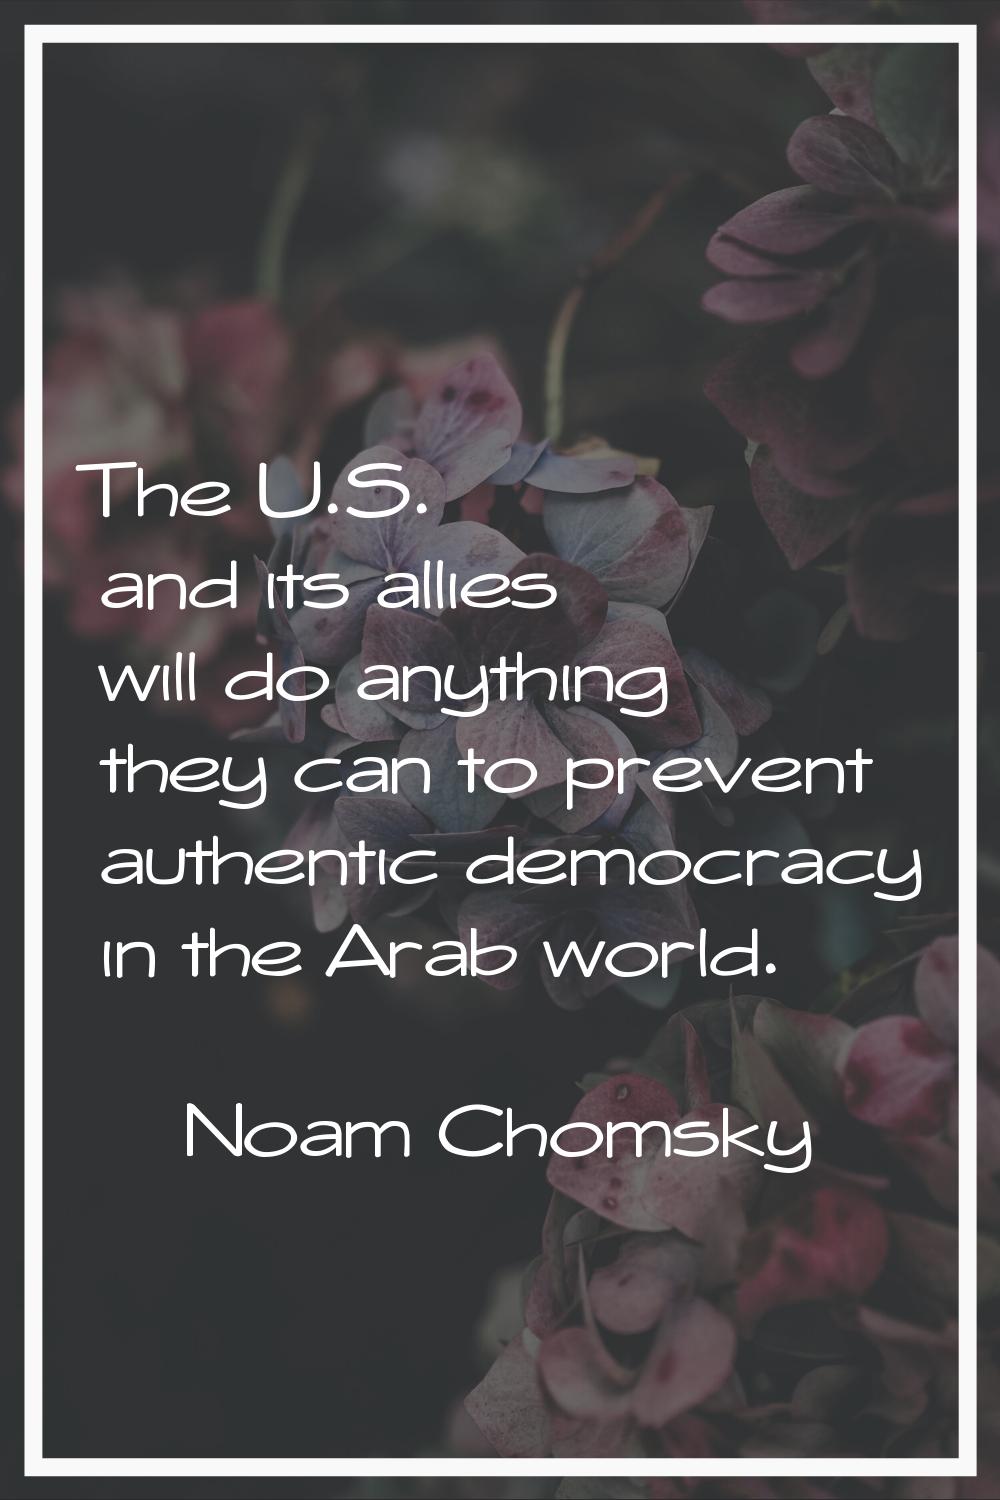 The U.S. and its allies will do anything they can to prevent authentic democracy in the Arab world.